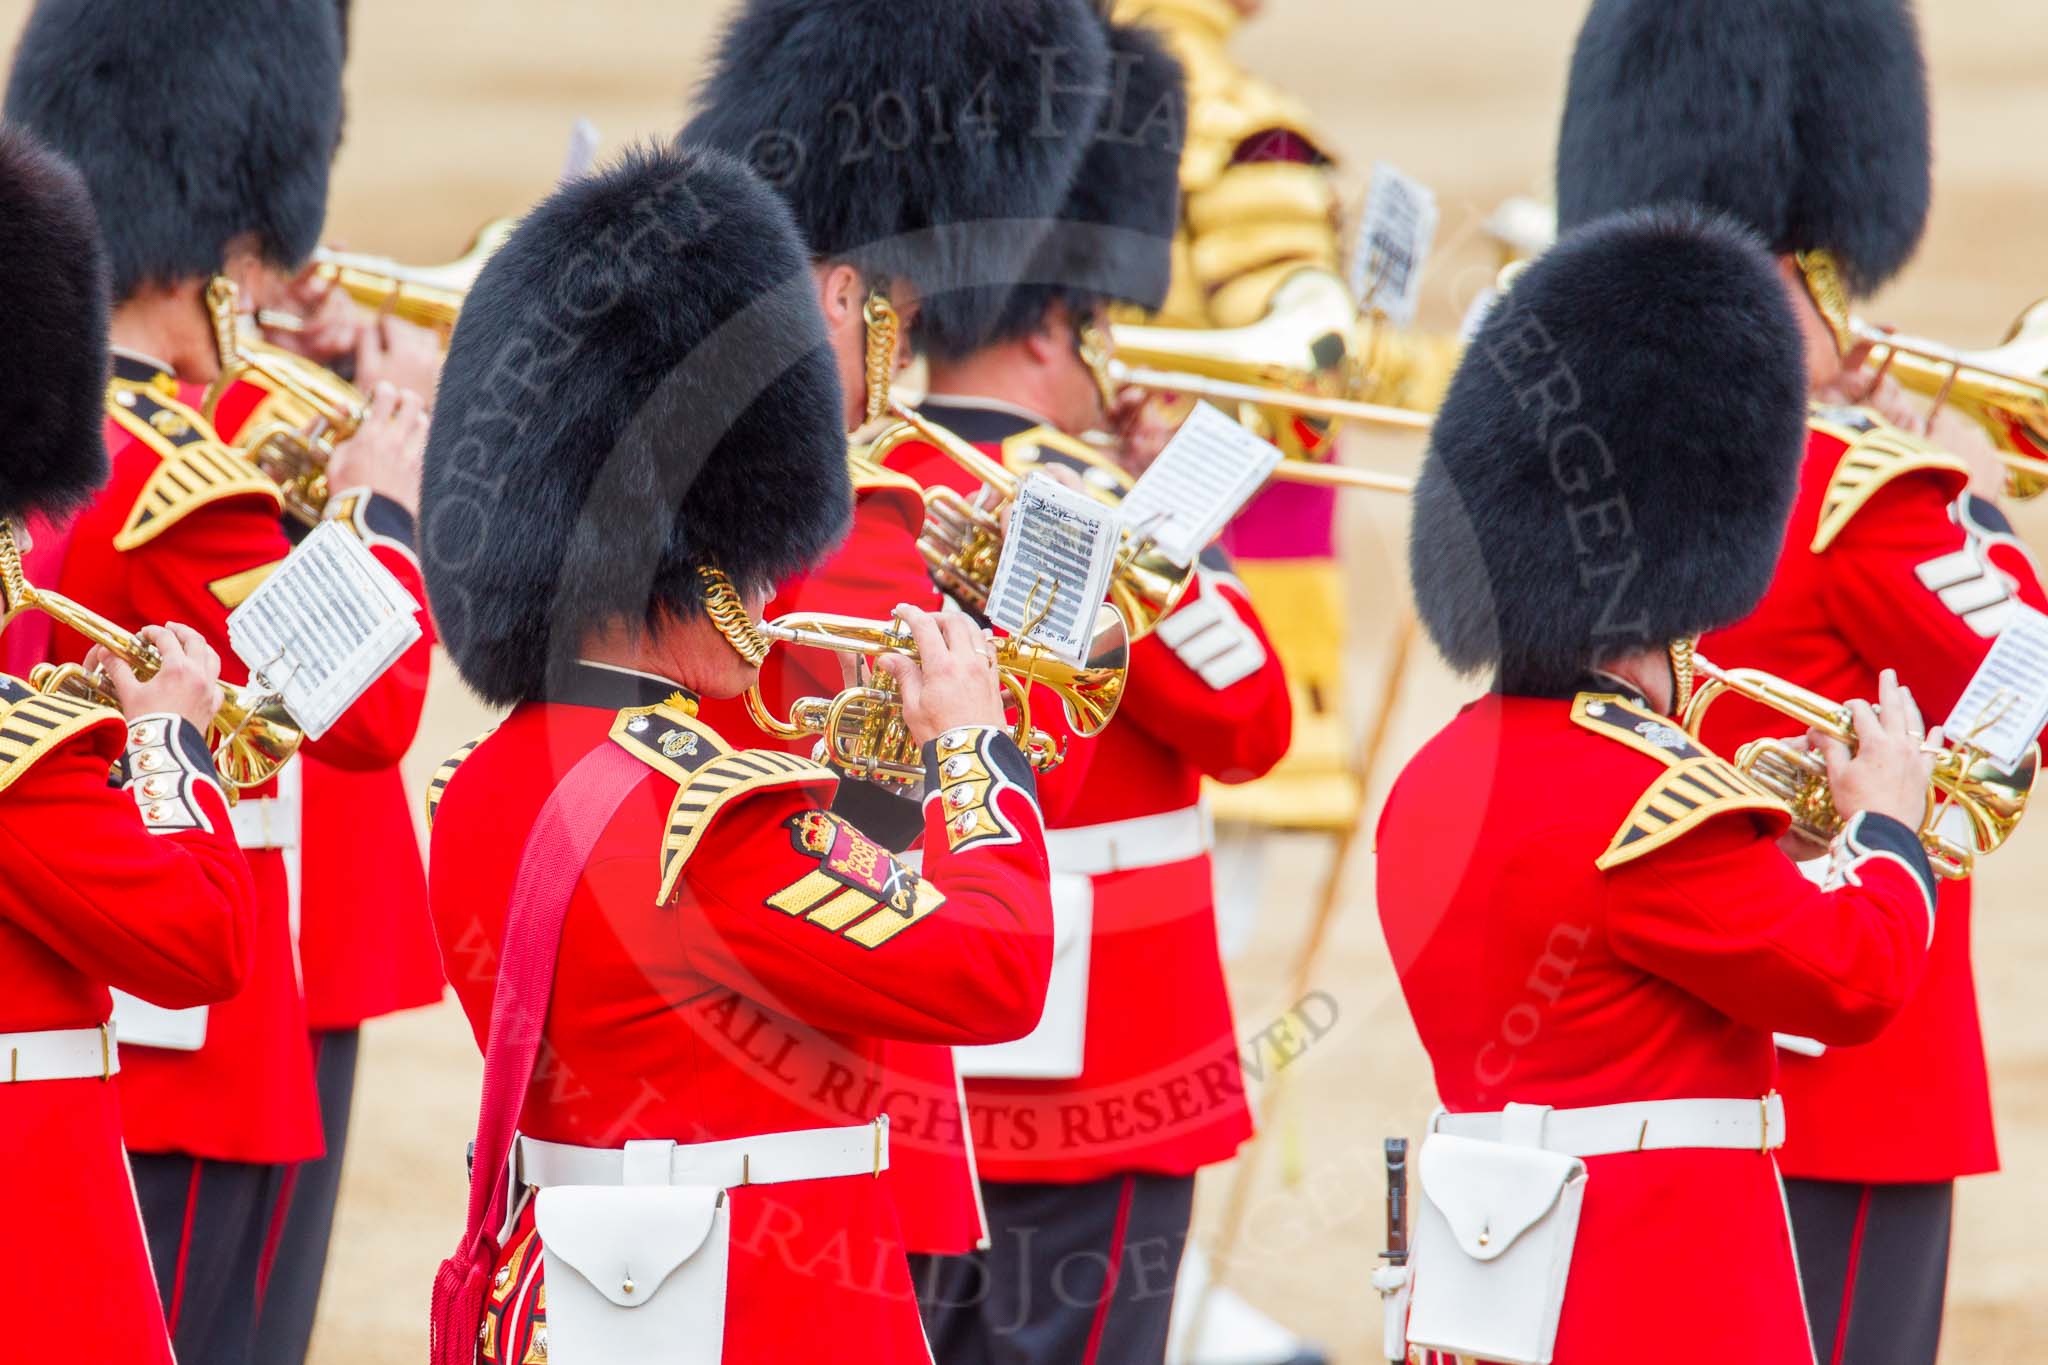 Trooping the Colour 2014.
Horse Guards Parade, Westminster,
London SW1A,

United Kingdom,
on 14 June 2014 at 11:15, image #489